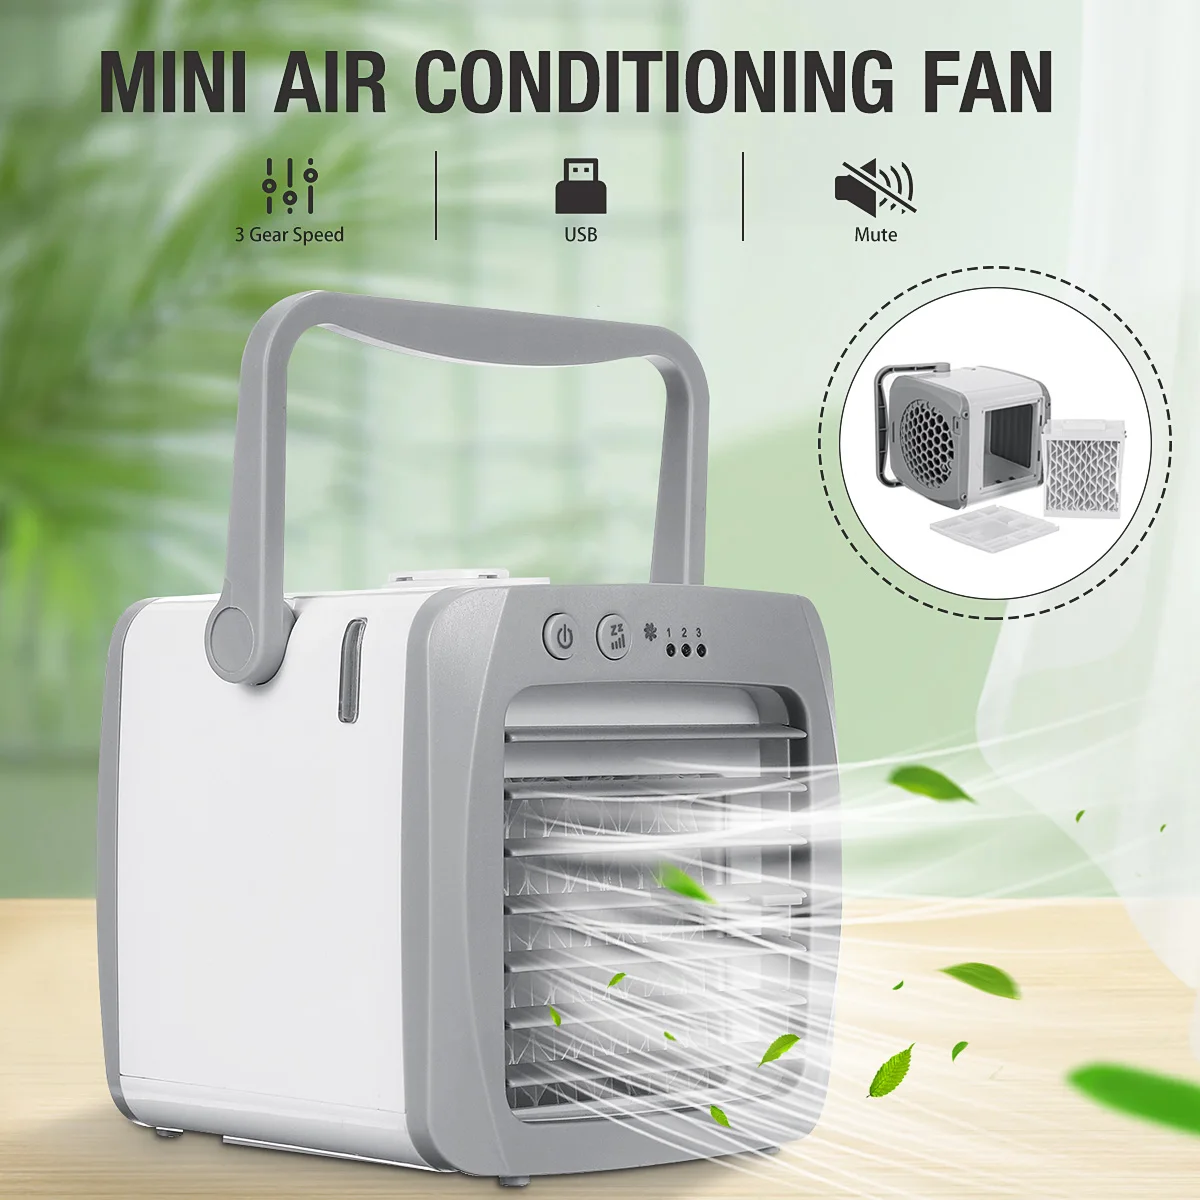 

Portable Mini Air Conditioner 200ml Water Cooling Fan Air Humidifier 3 Gear Speed USB Air Cooler Fan For Home Office Desktop